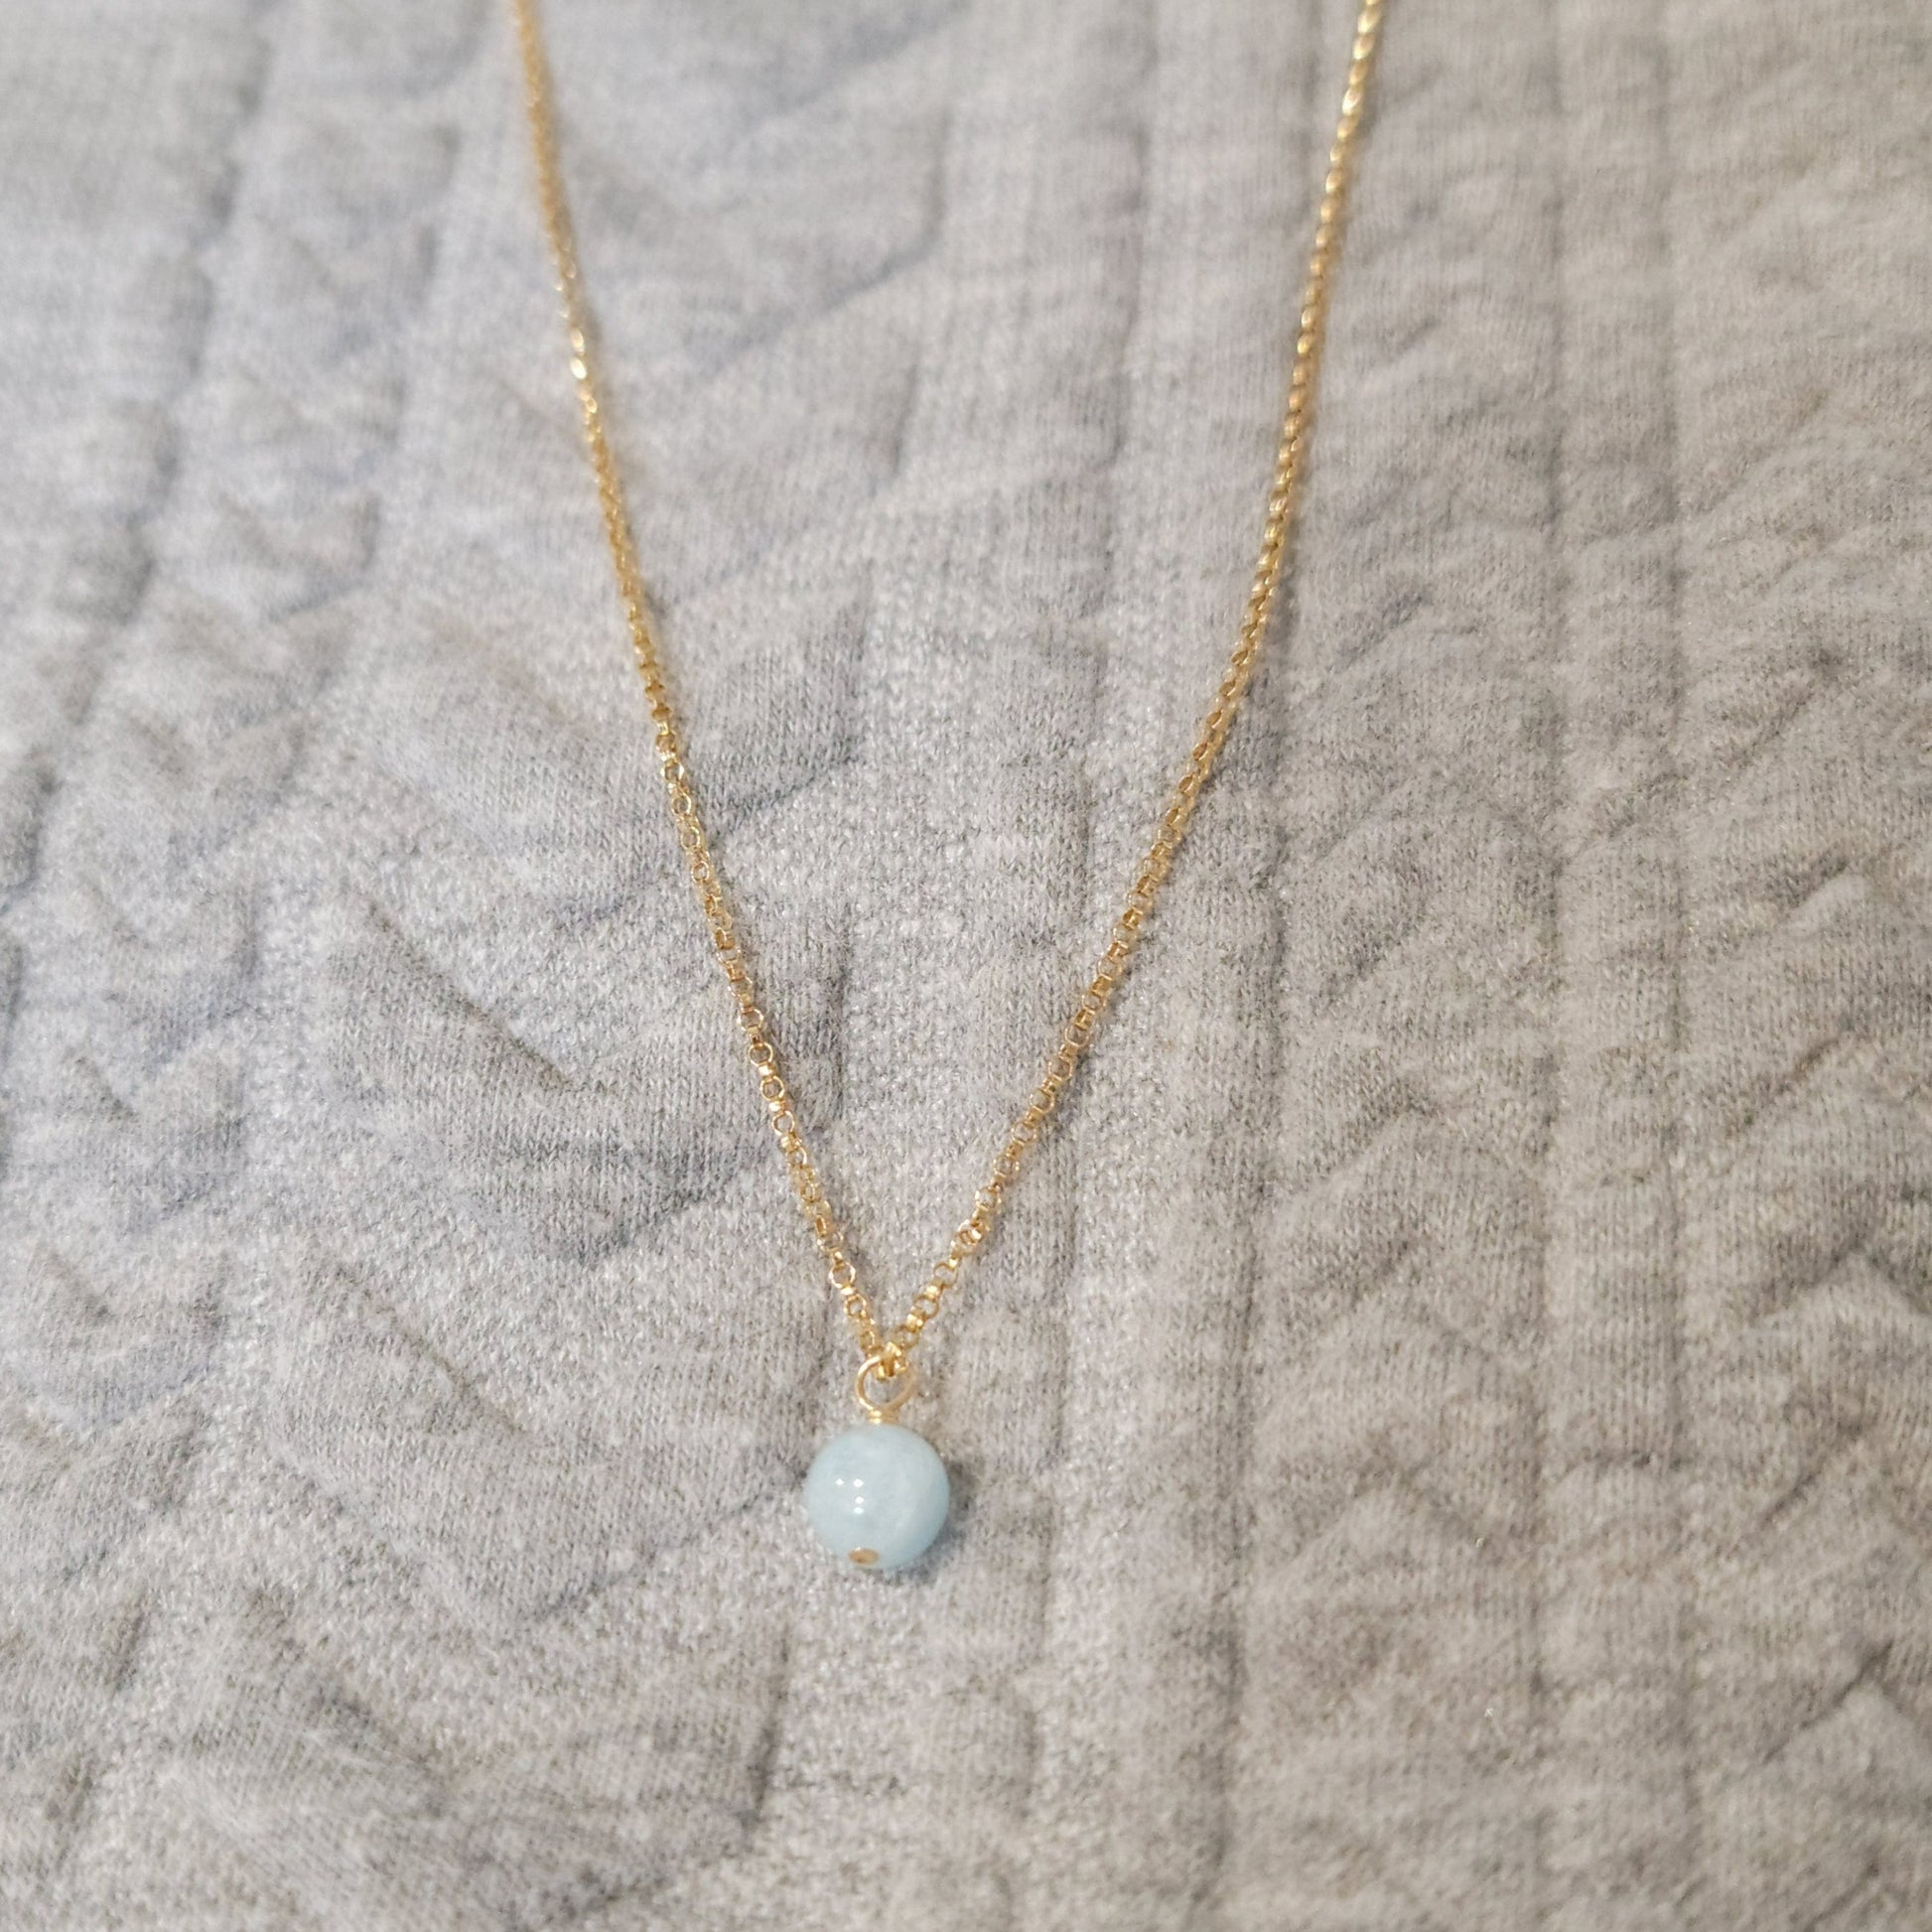 small 6mm aquamarine gemstone hanging from 14k gold filled rolo chain 